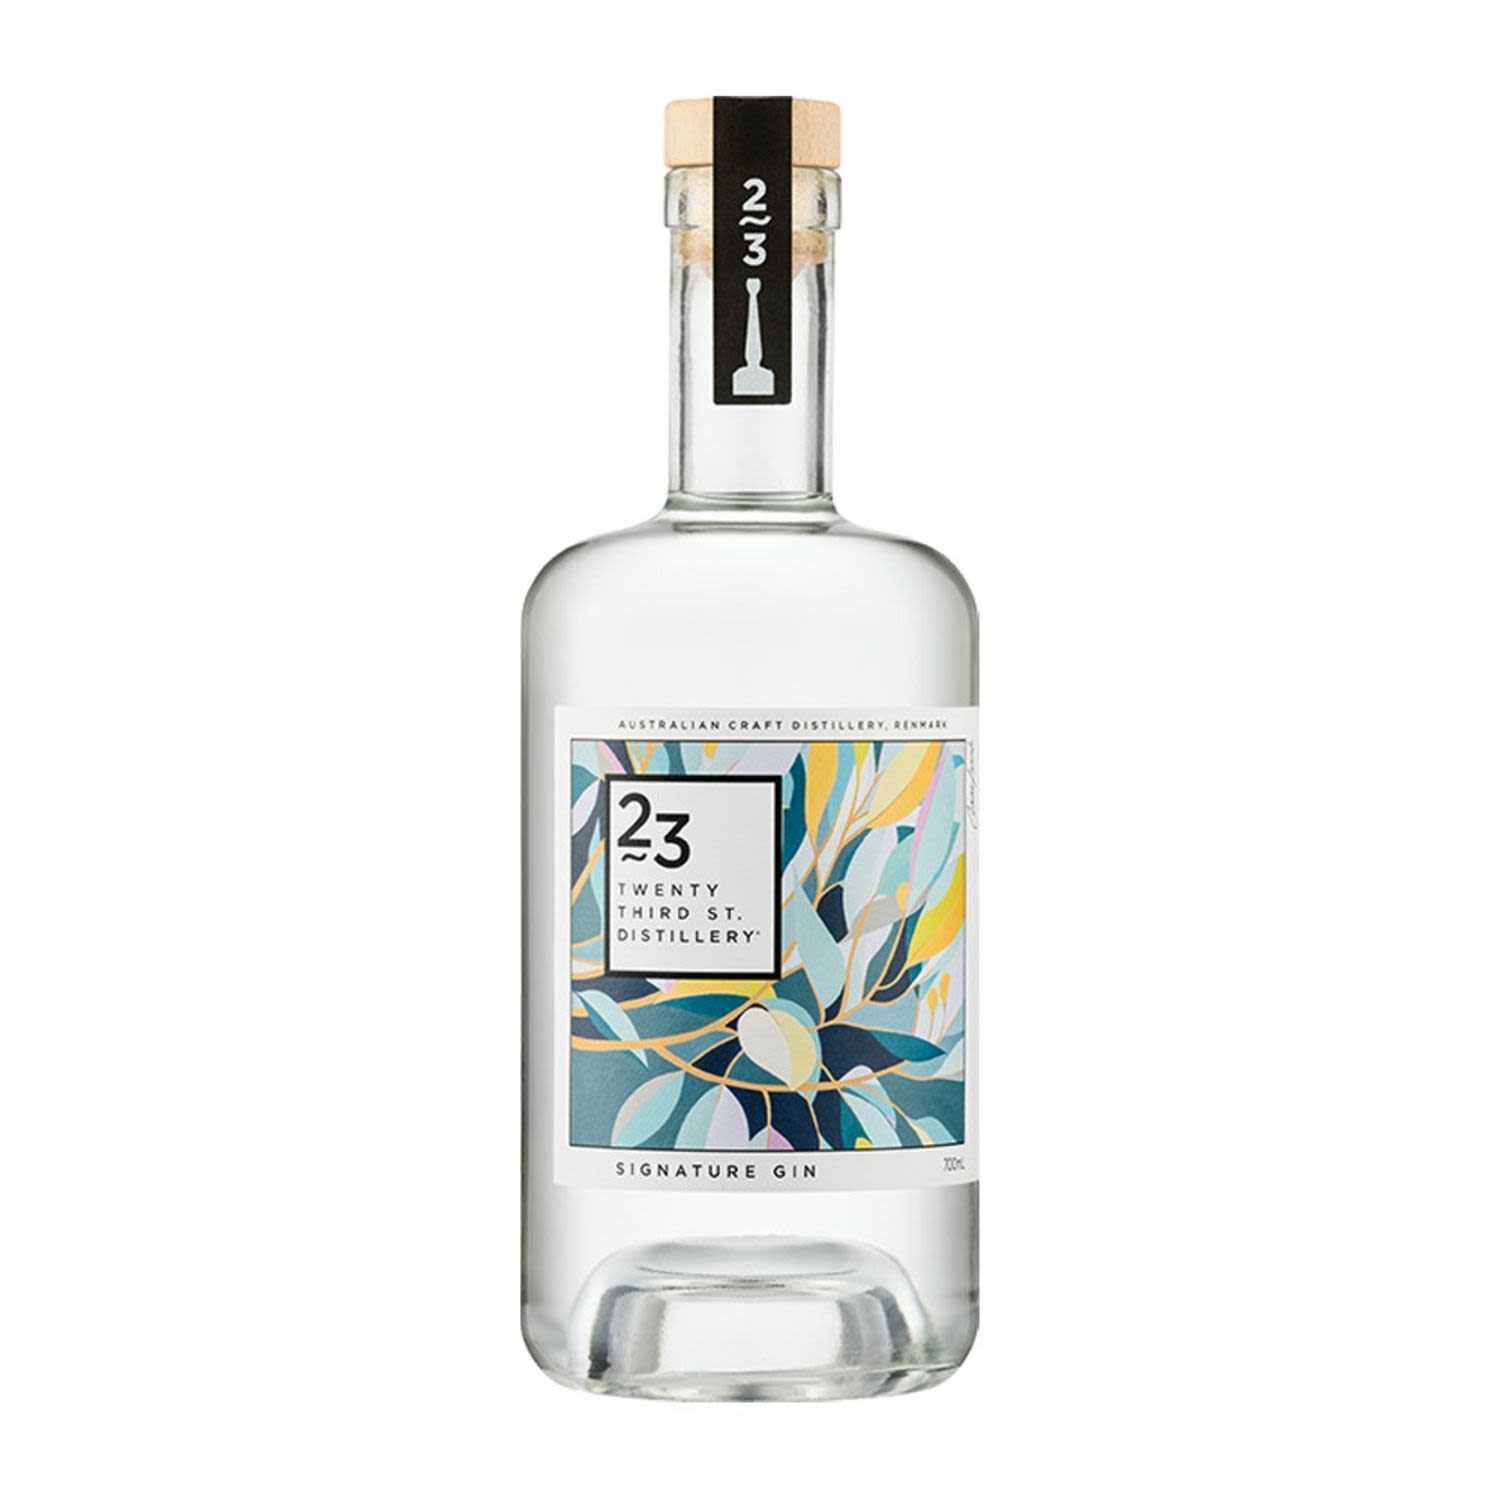 23rd Street's distiller individually infuses ten botanicals including traditional juniper and coriander, complemented by zesty local citrus. Astute blending is key, creating a layered palate and full-bodied mouthfeel.<br /> <br />Alcohol Volume: 40.00%<br /><br />Pack Format: Bottle<br /><br />Standard Drinks: 22.1</br /><br />Pack Type: Bottle<br /><br />Country of Origin: Australia<br />